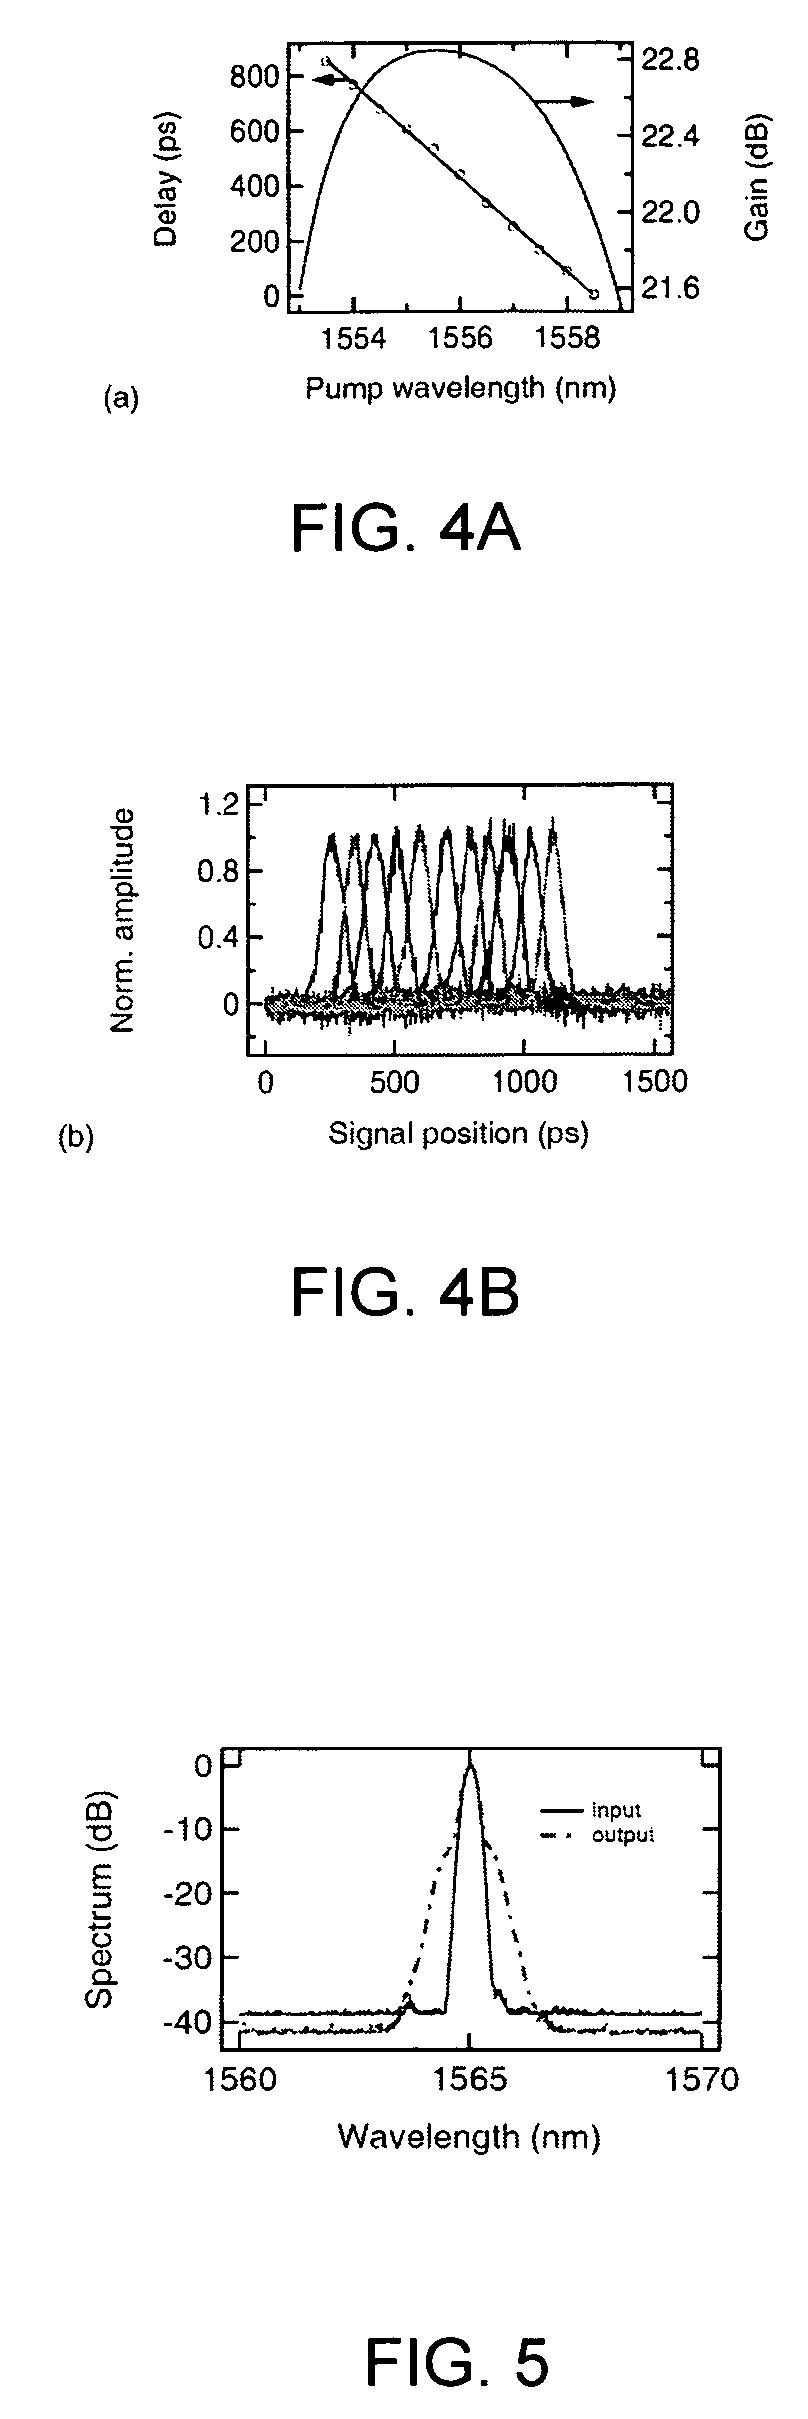 All-optical, continuously tunable, pulse delay generator using wavelength conversion and dispersion